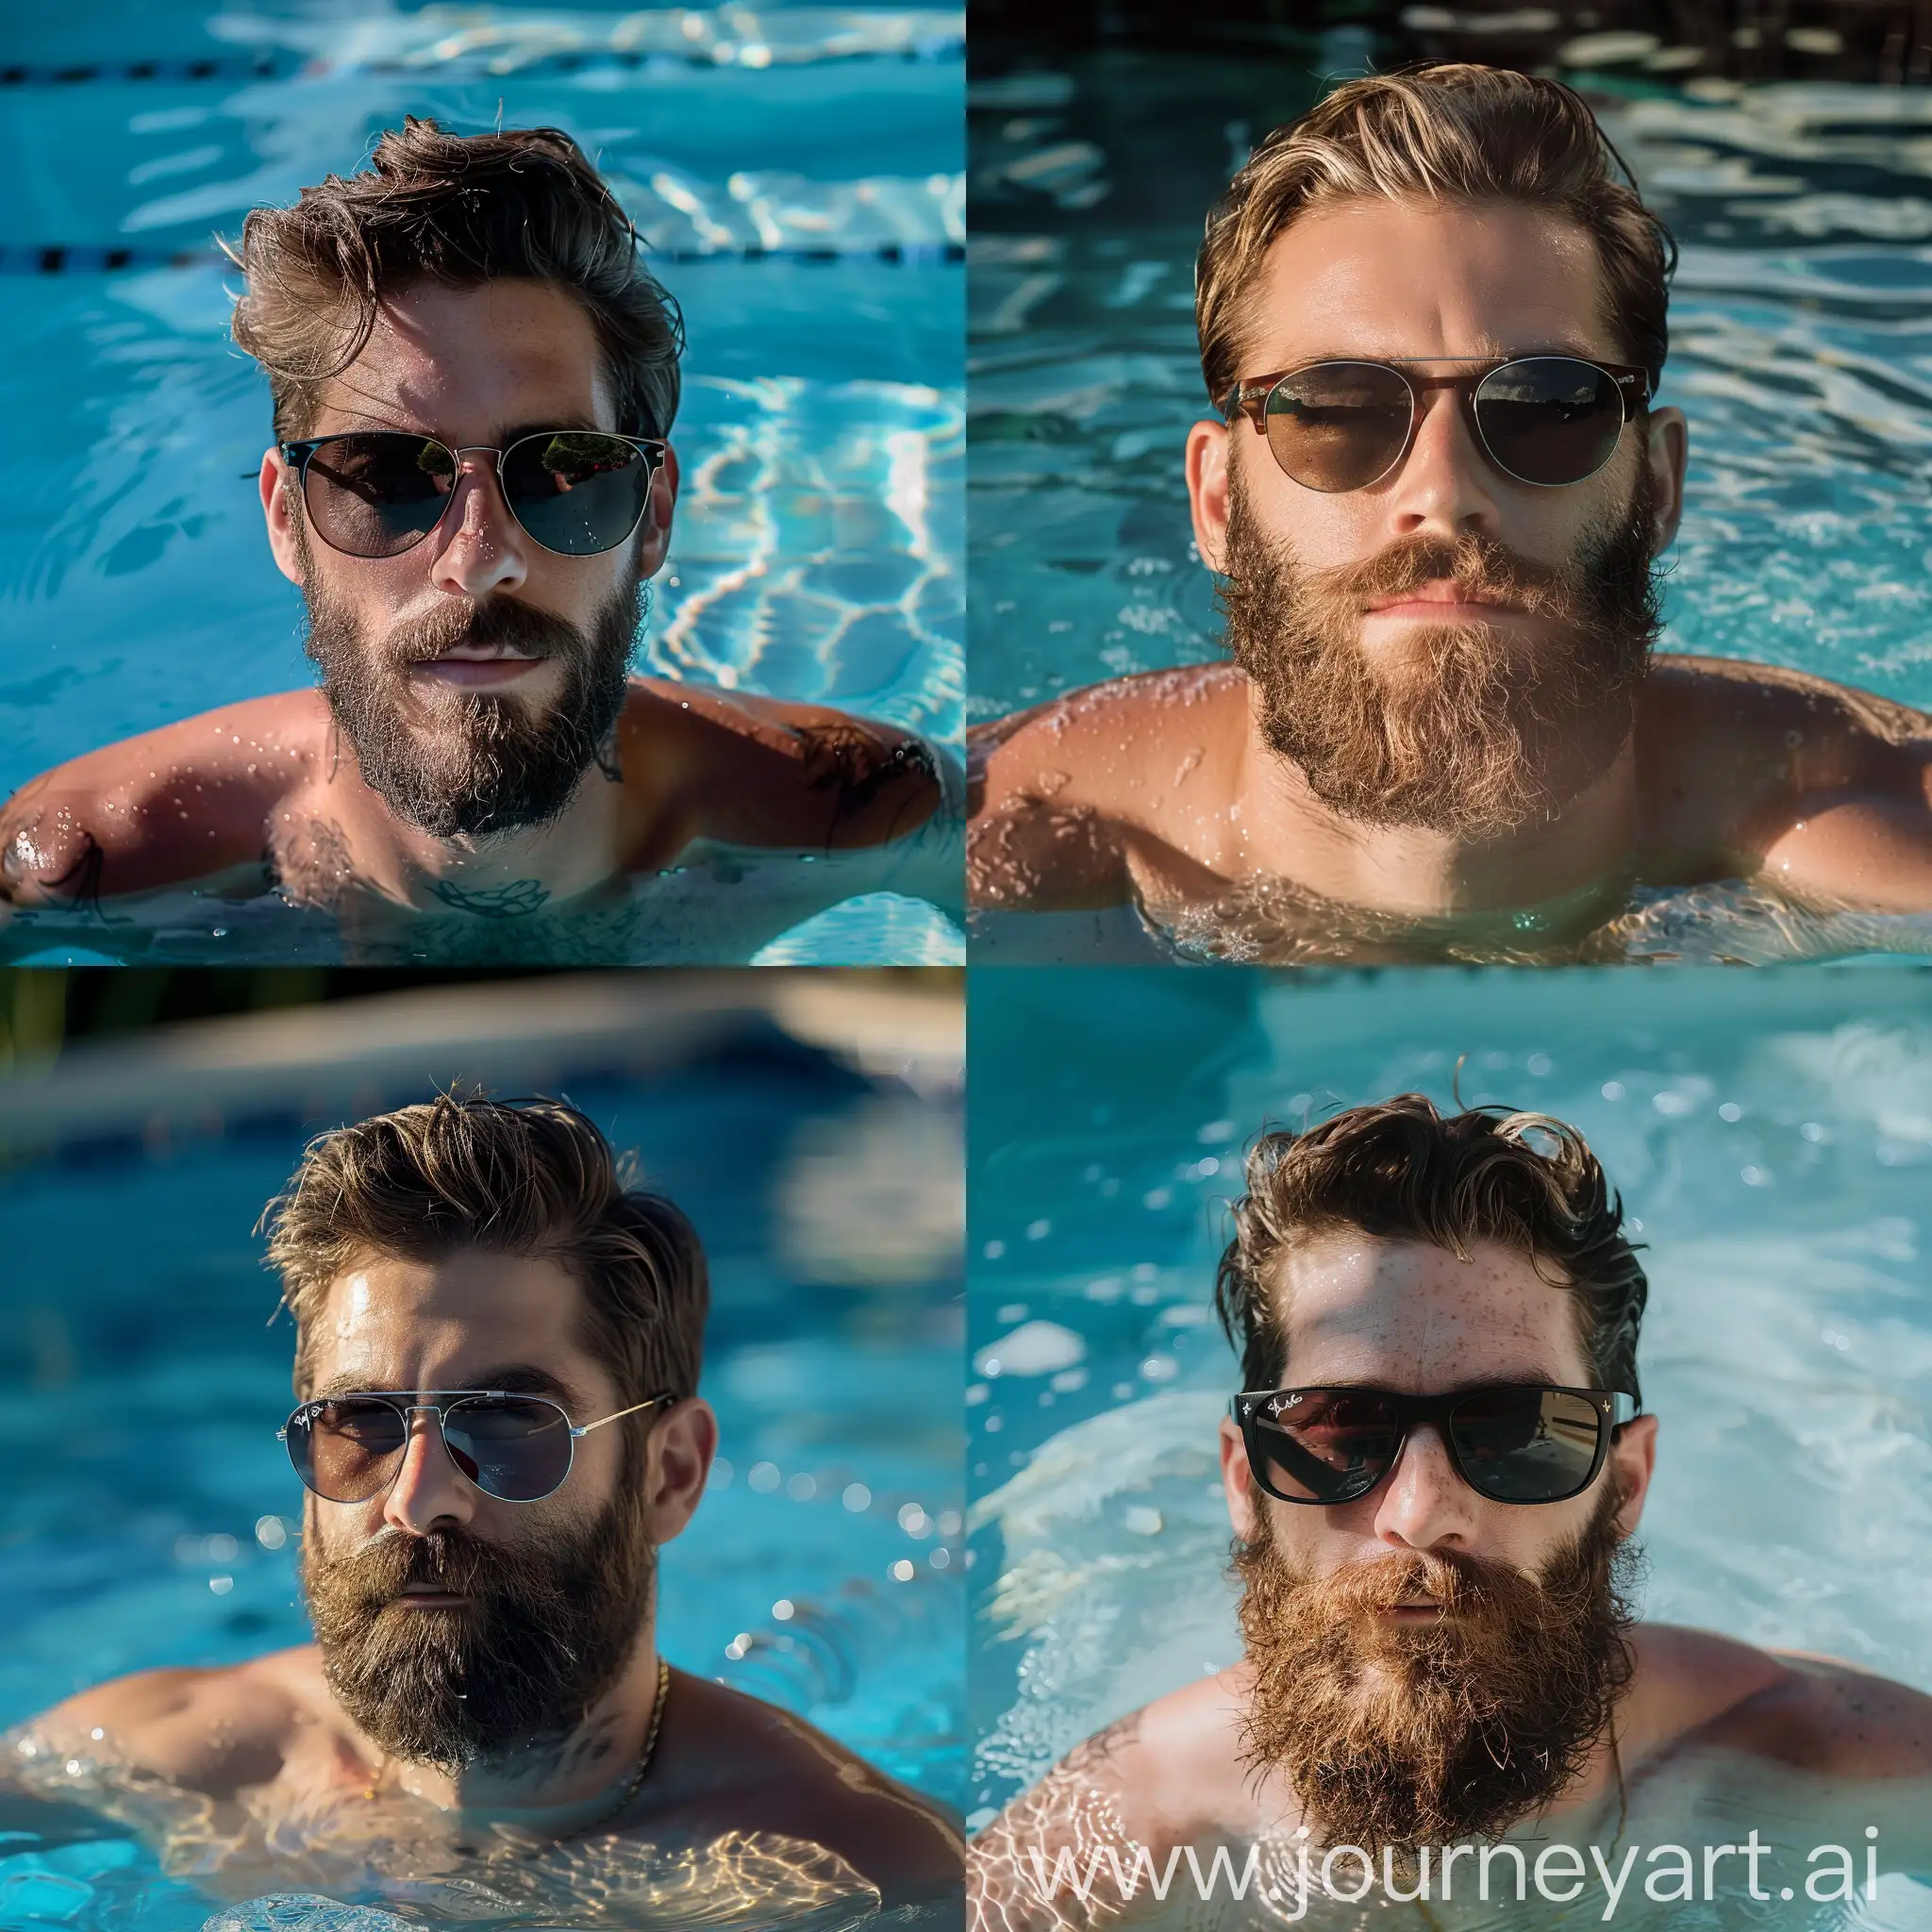 Stylish-Man-with-Sunglasses-in-a-Festive-Swimming-Pool